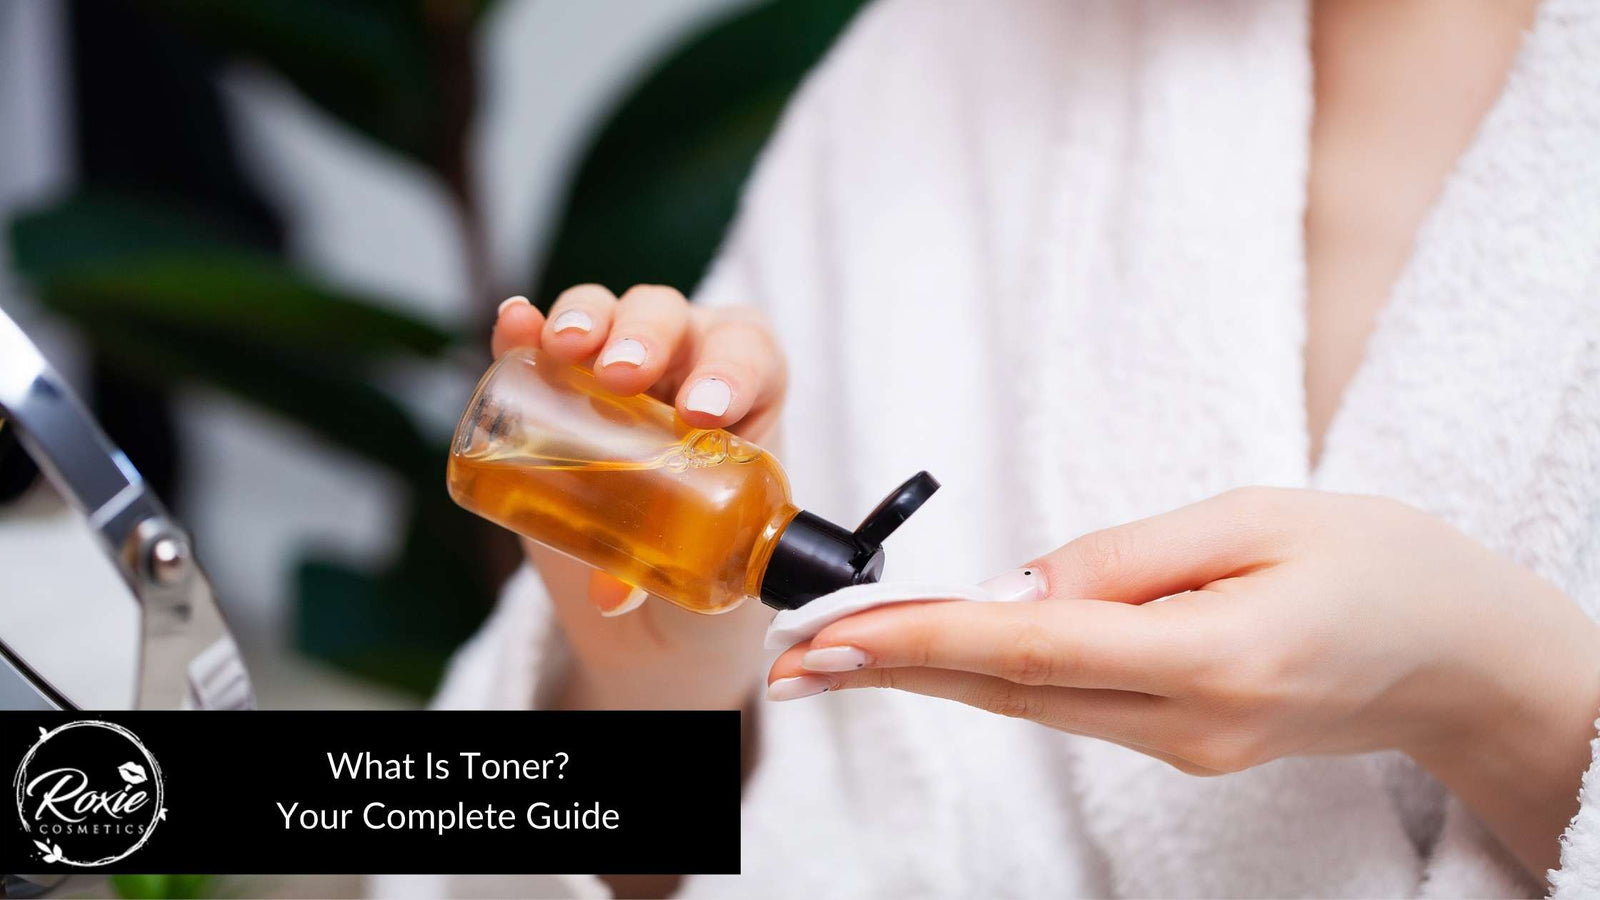 What Is Toner? Your Complete Guide